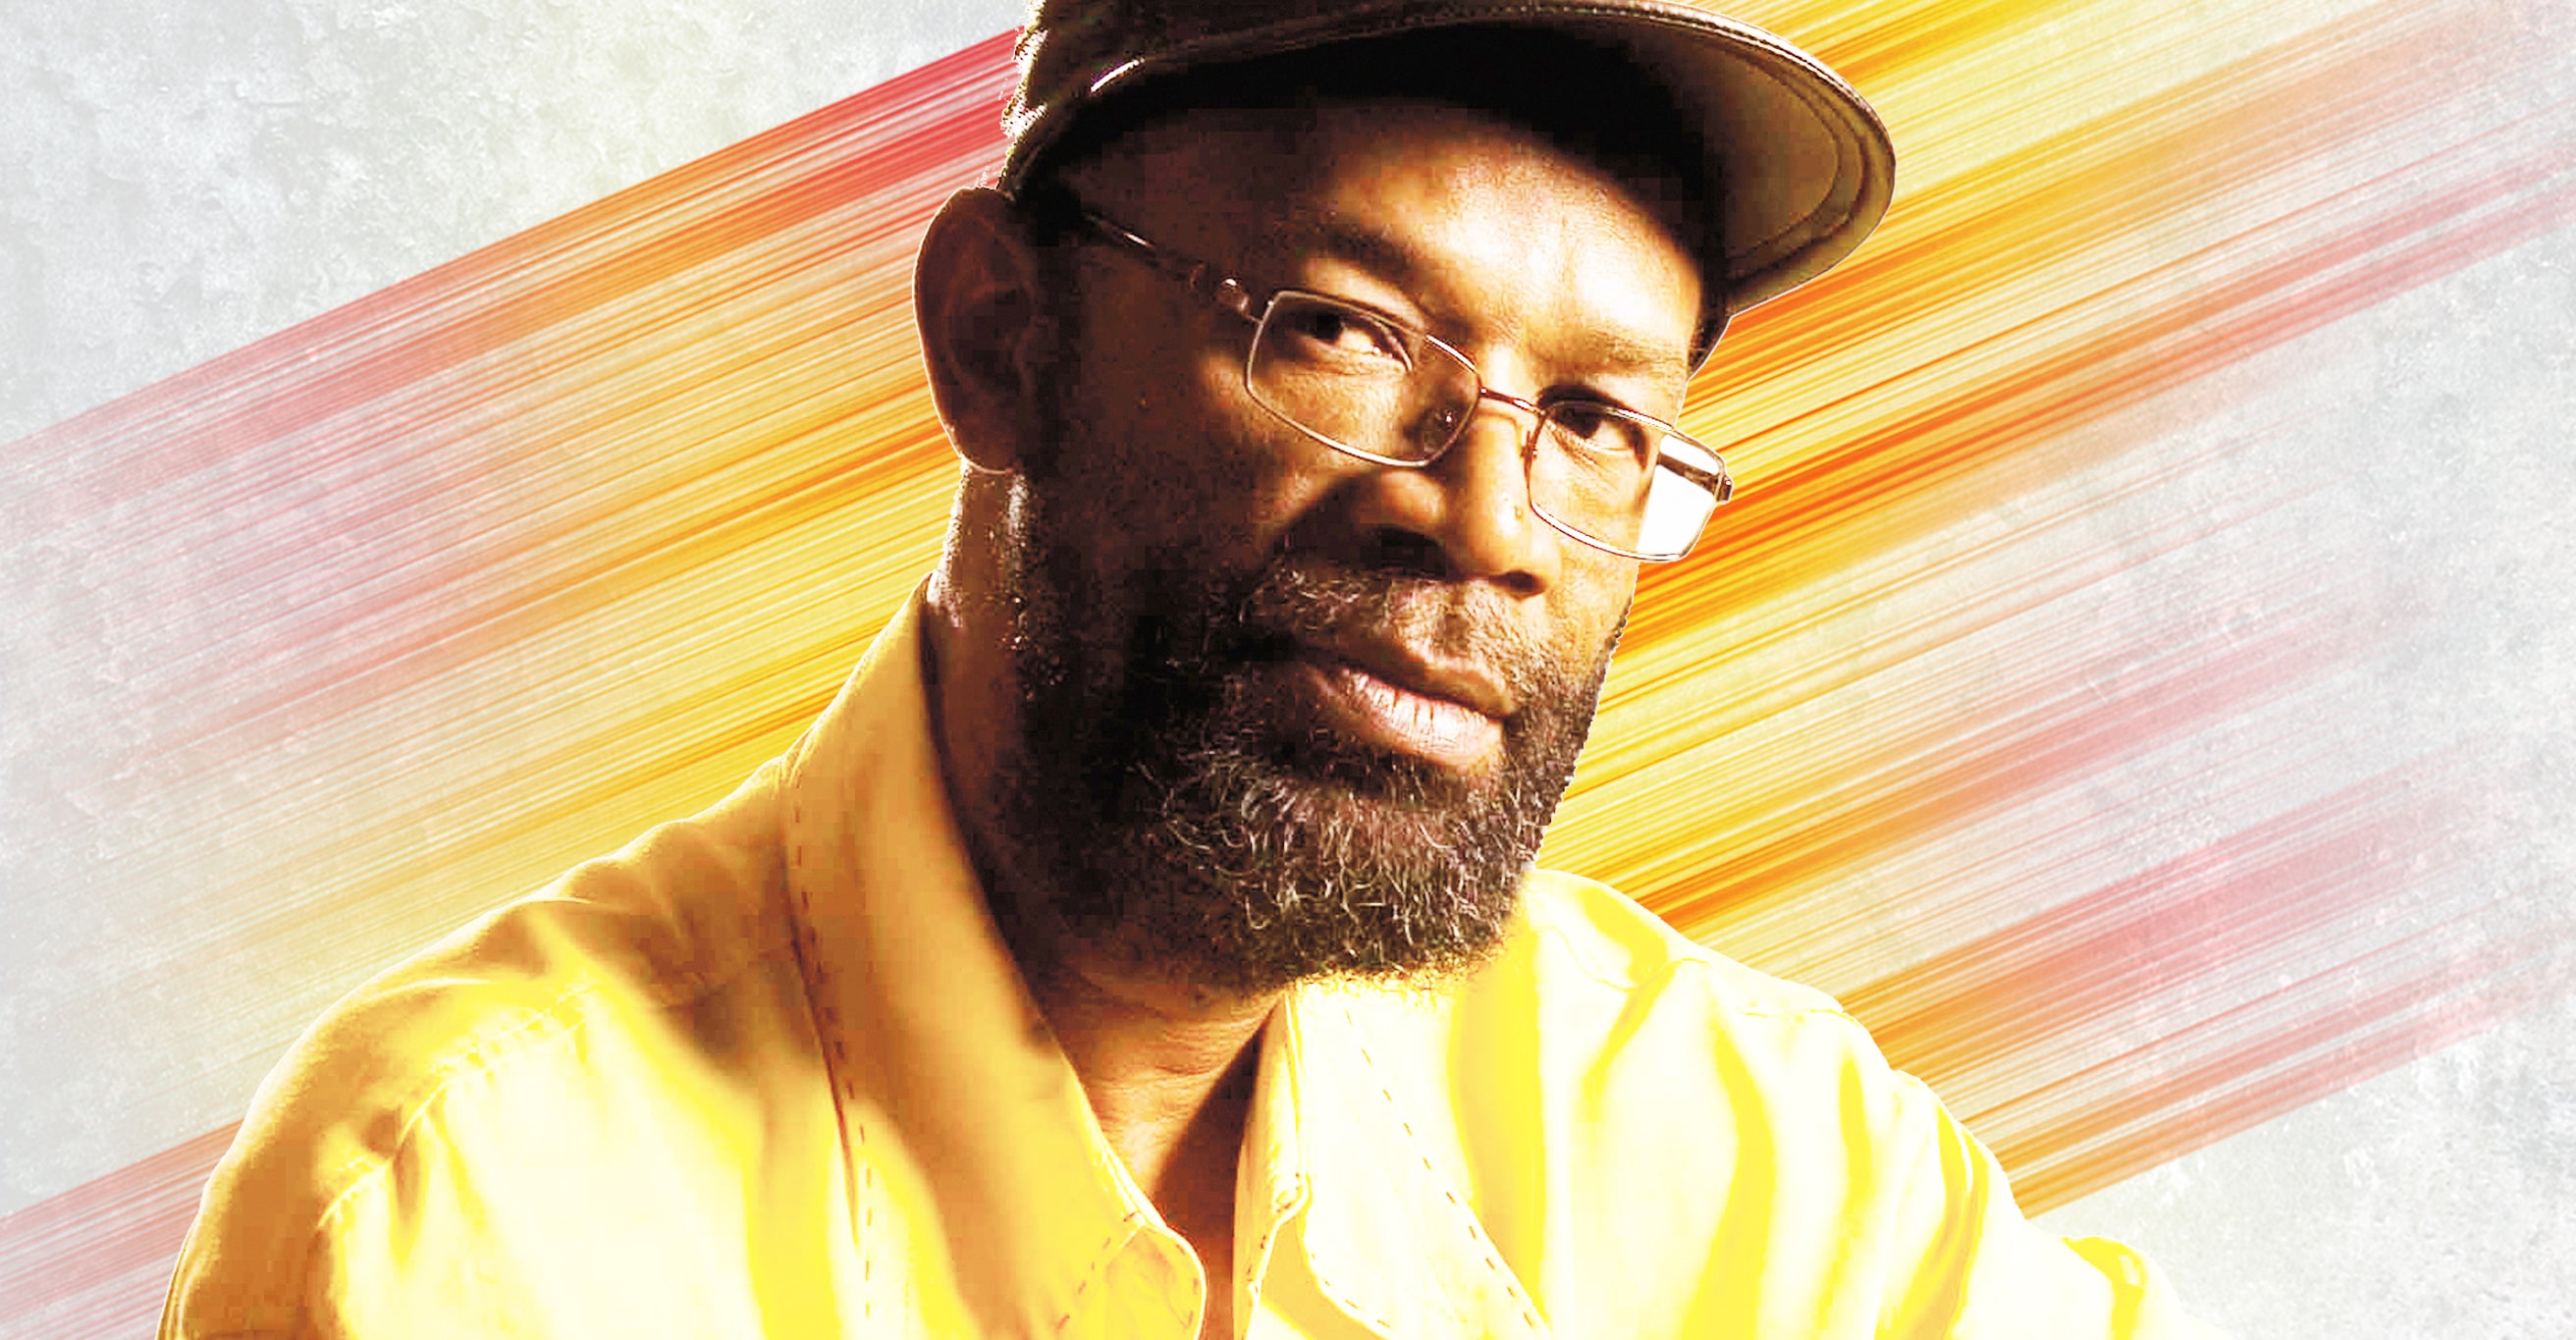 Beres Hammond and Friends with special guest Mikey Spice